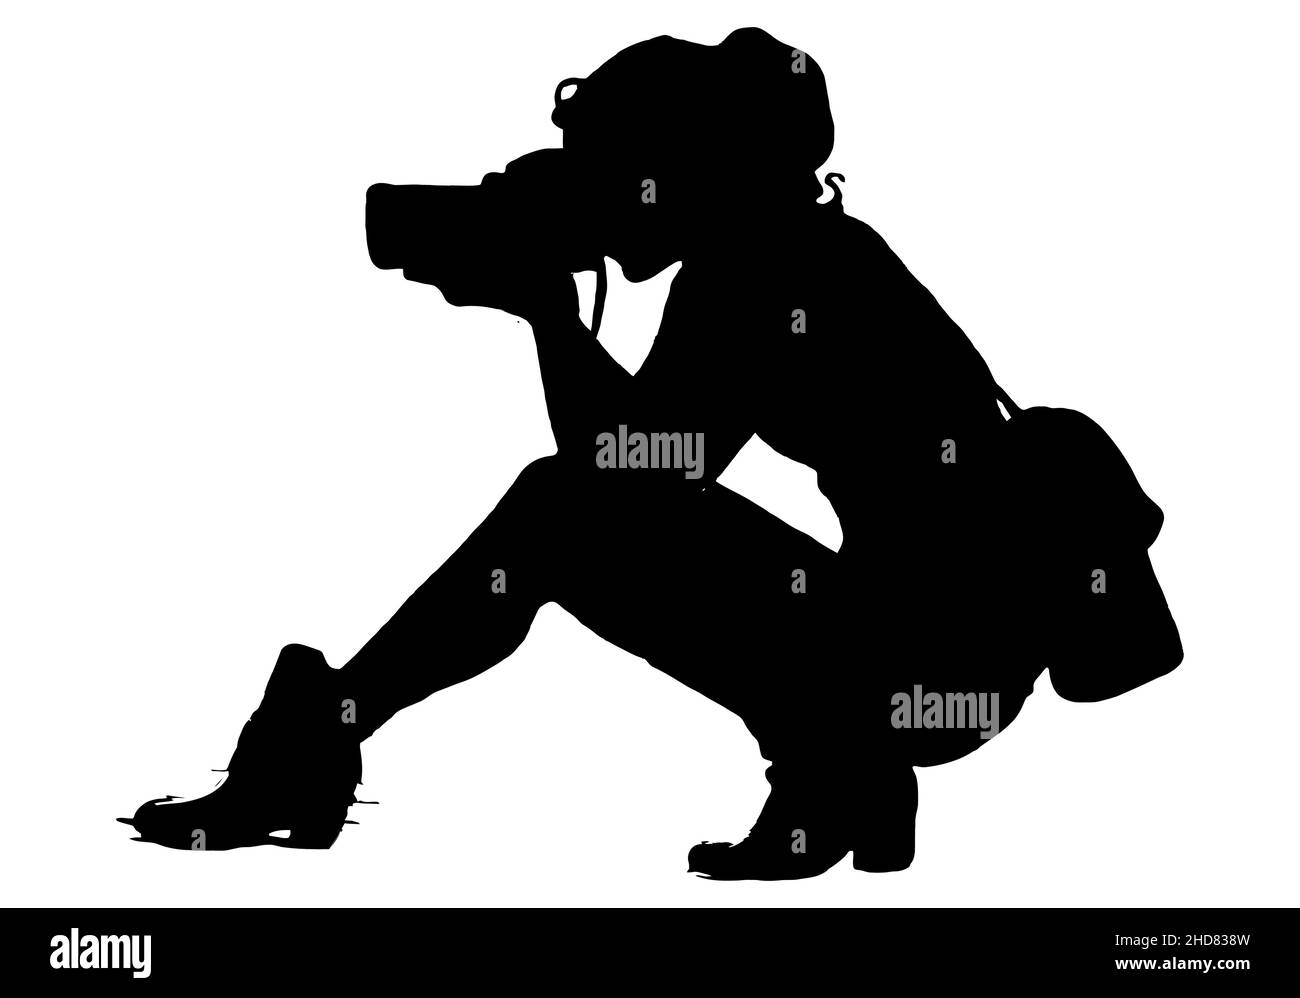 Black silhouettes of a lady or woman photographer, girl taking photos while sitting down, professional Stock Vector